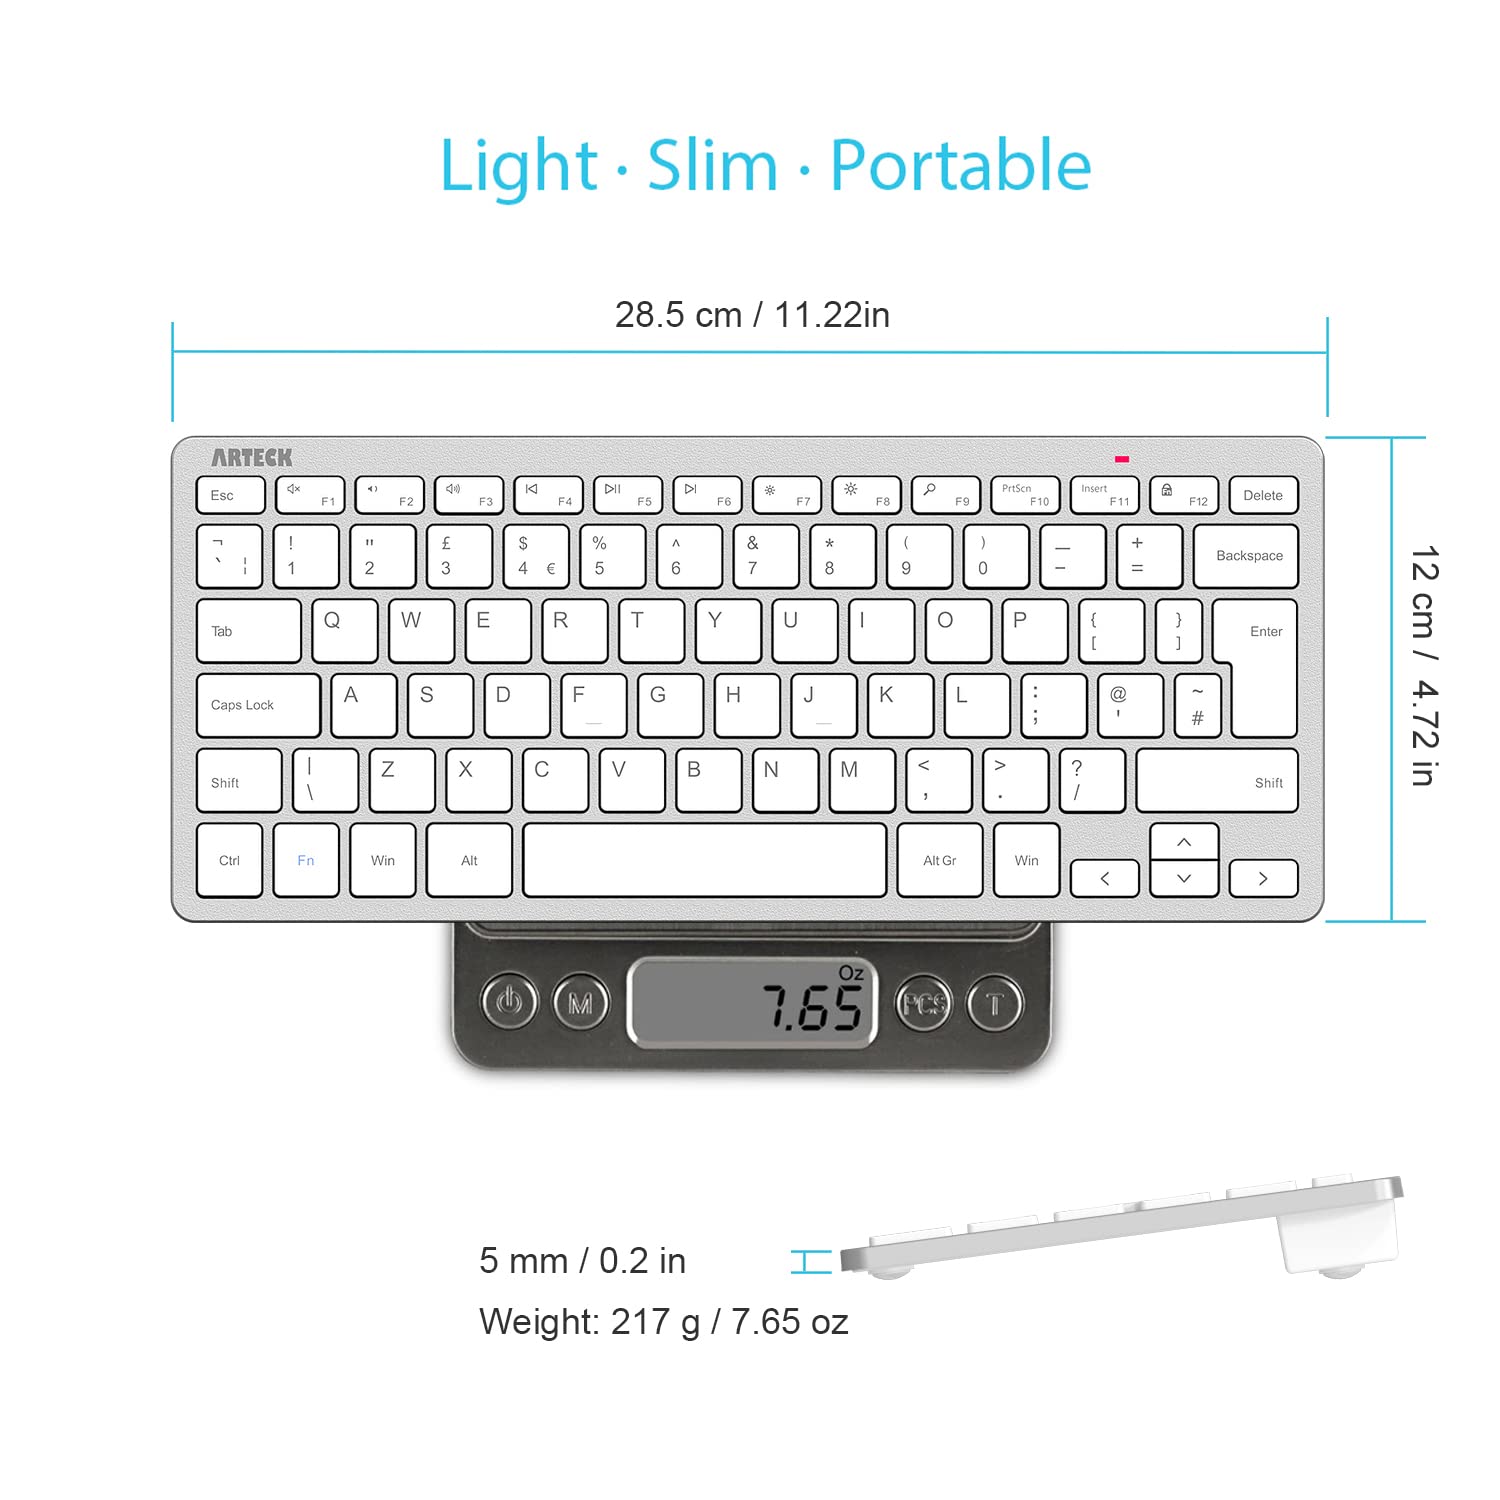 Arteck 2.4G Wireless Keyboard Ultra Slim and Compact Keyboard with Media Hotkeys for Computer Desktop PC Laptop Surface Smart TV and Windows 11/10/8/7, Silver